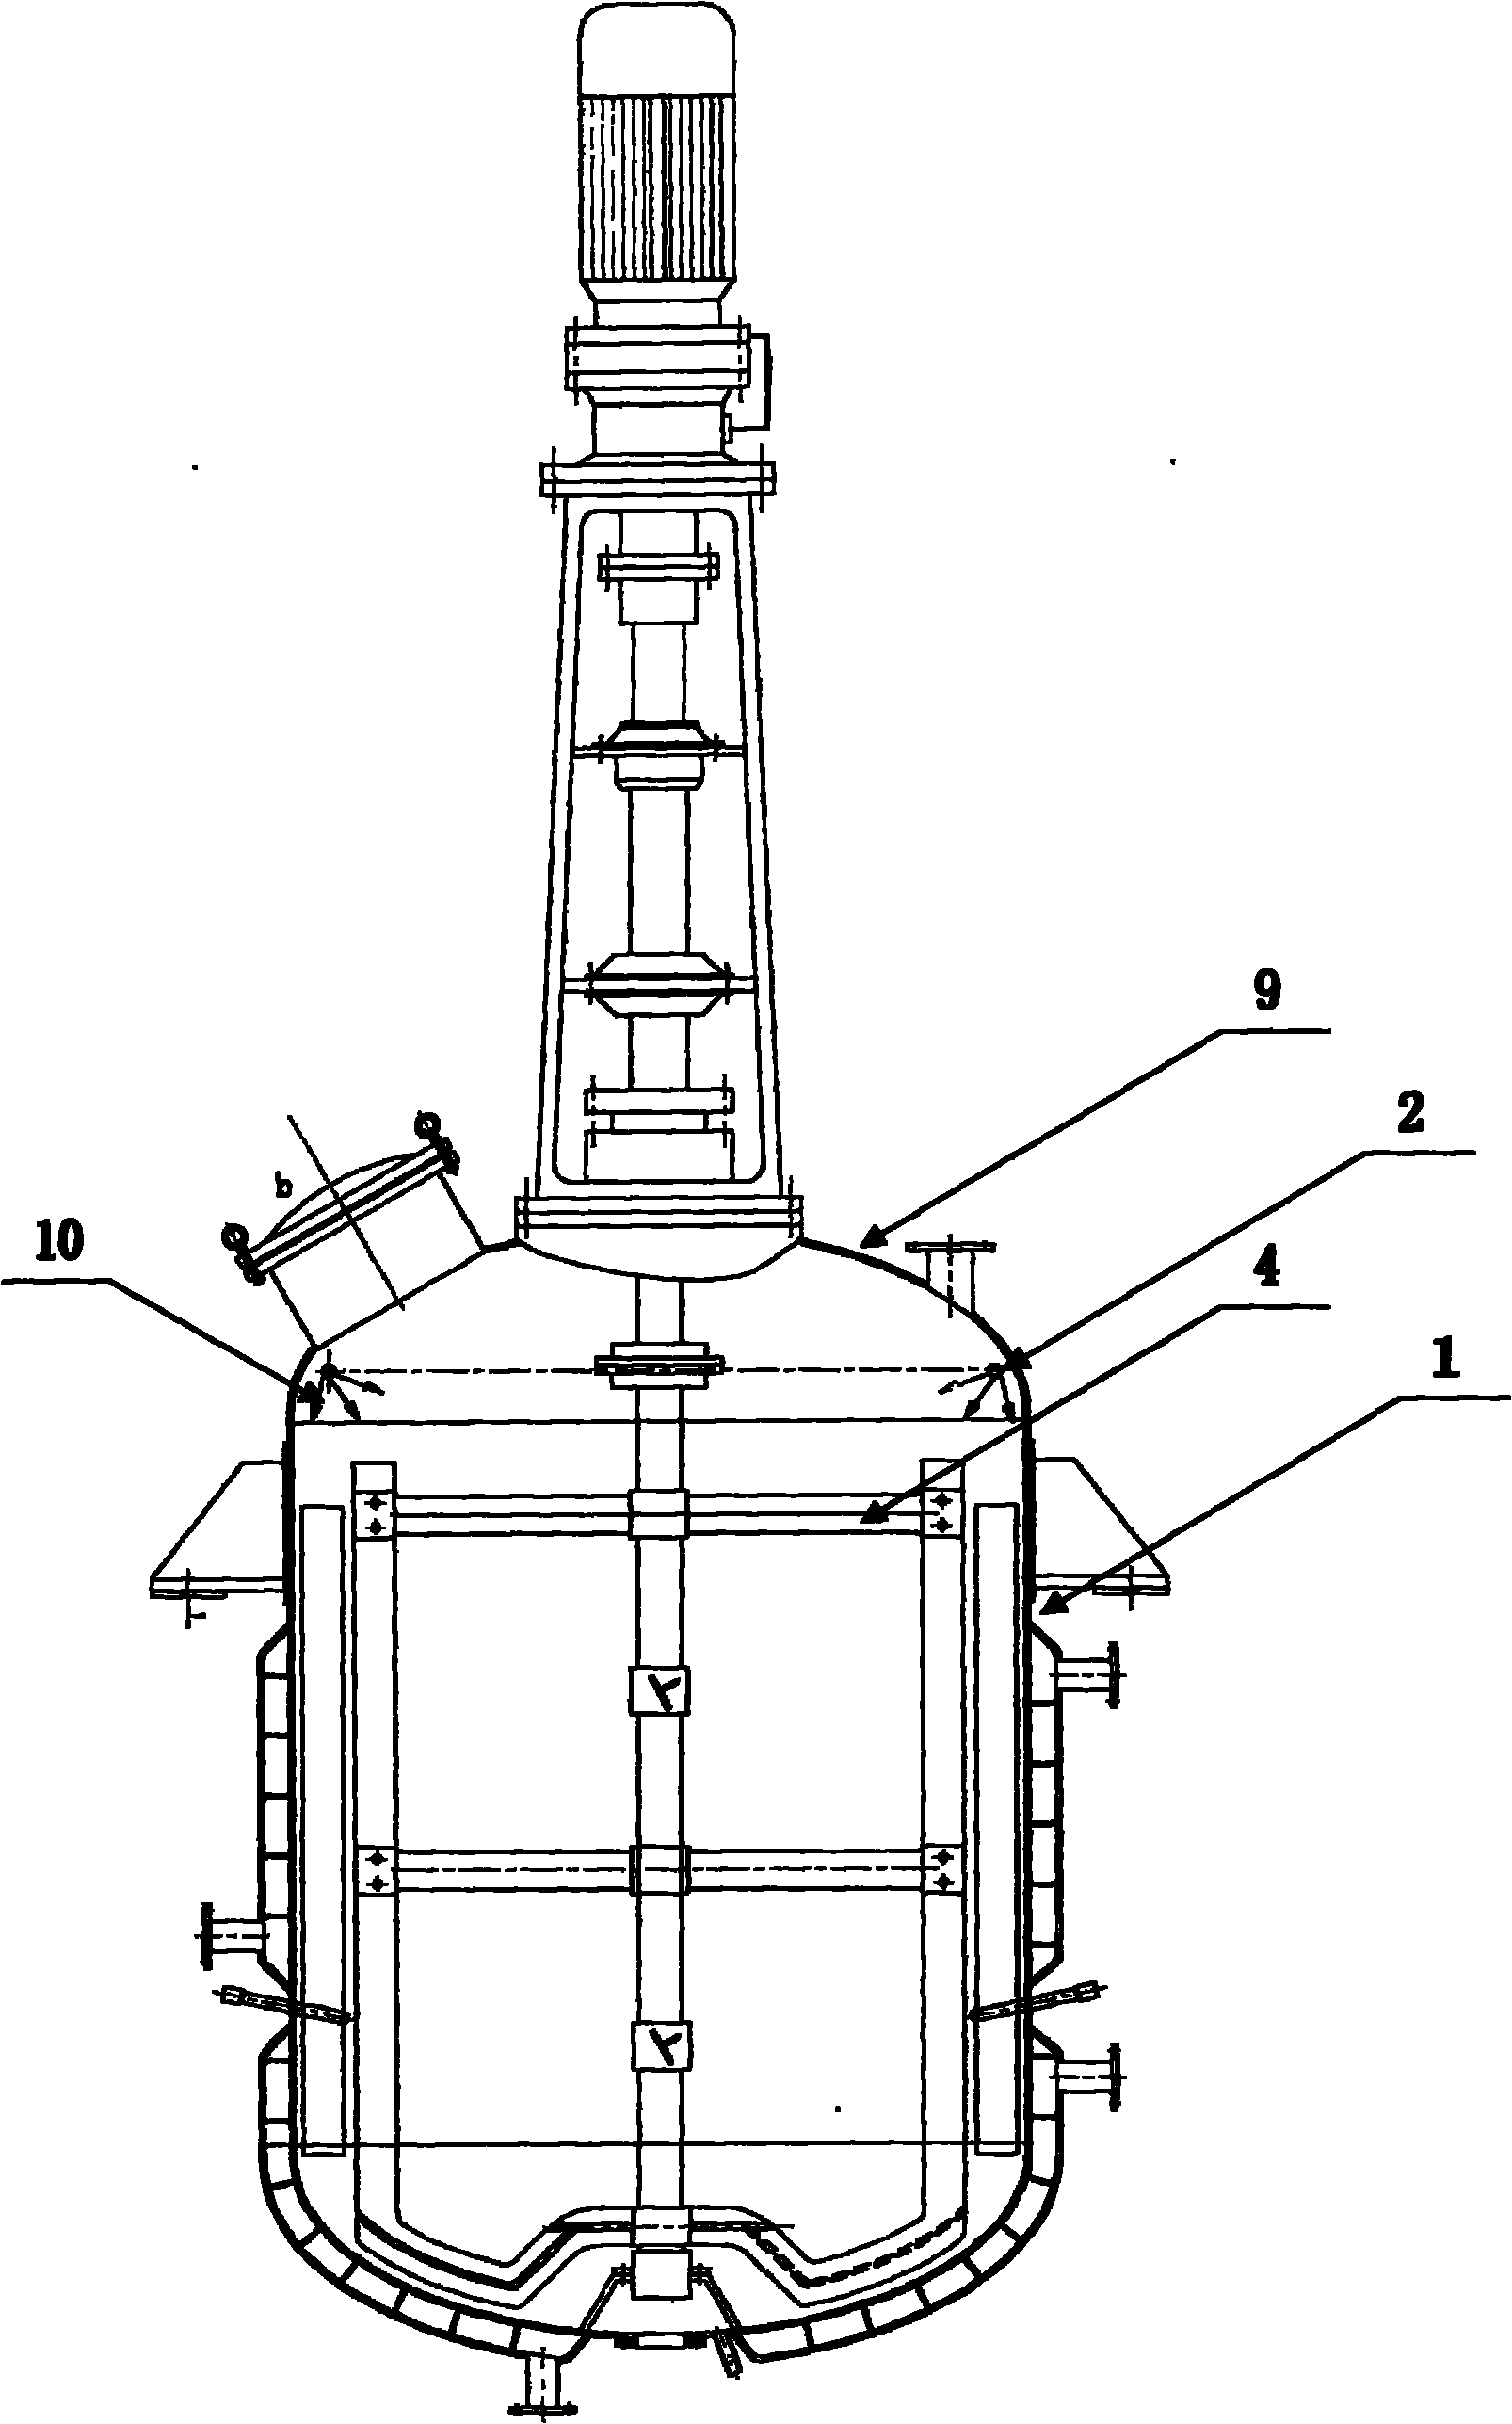 Reaction kettle provided with internal cleaning device